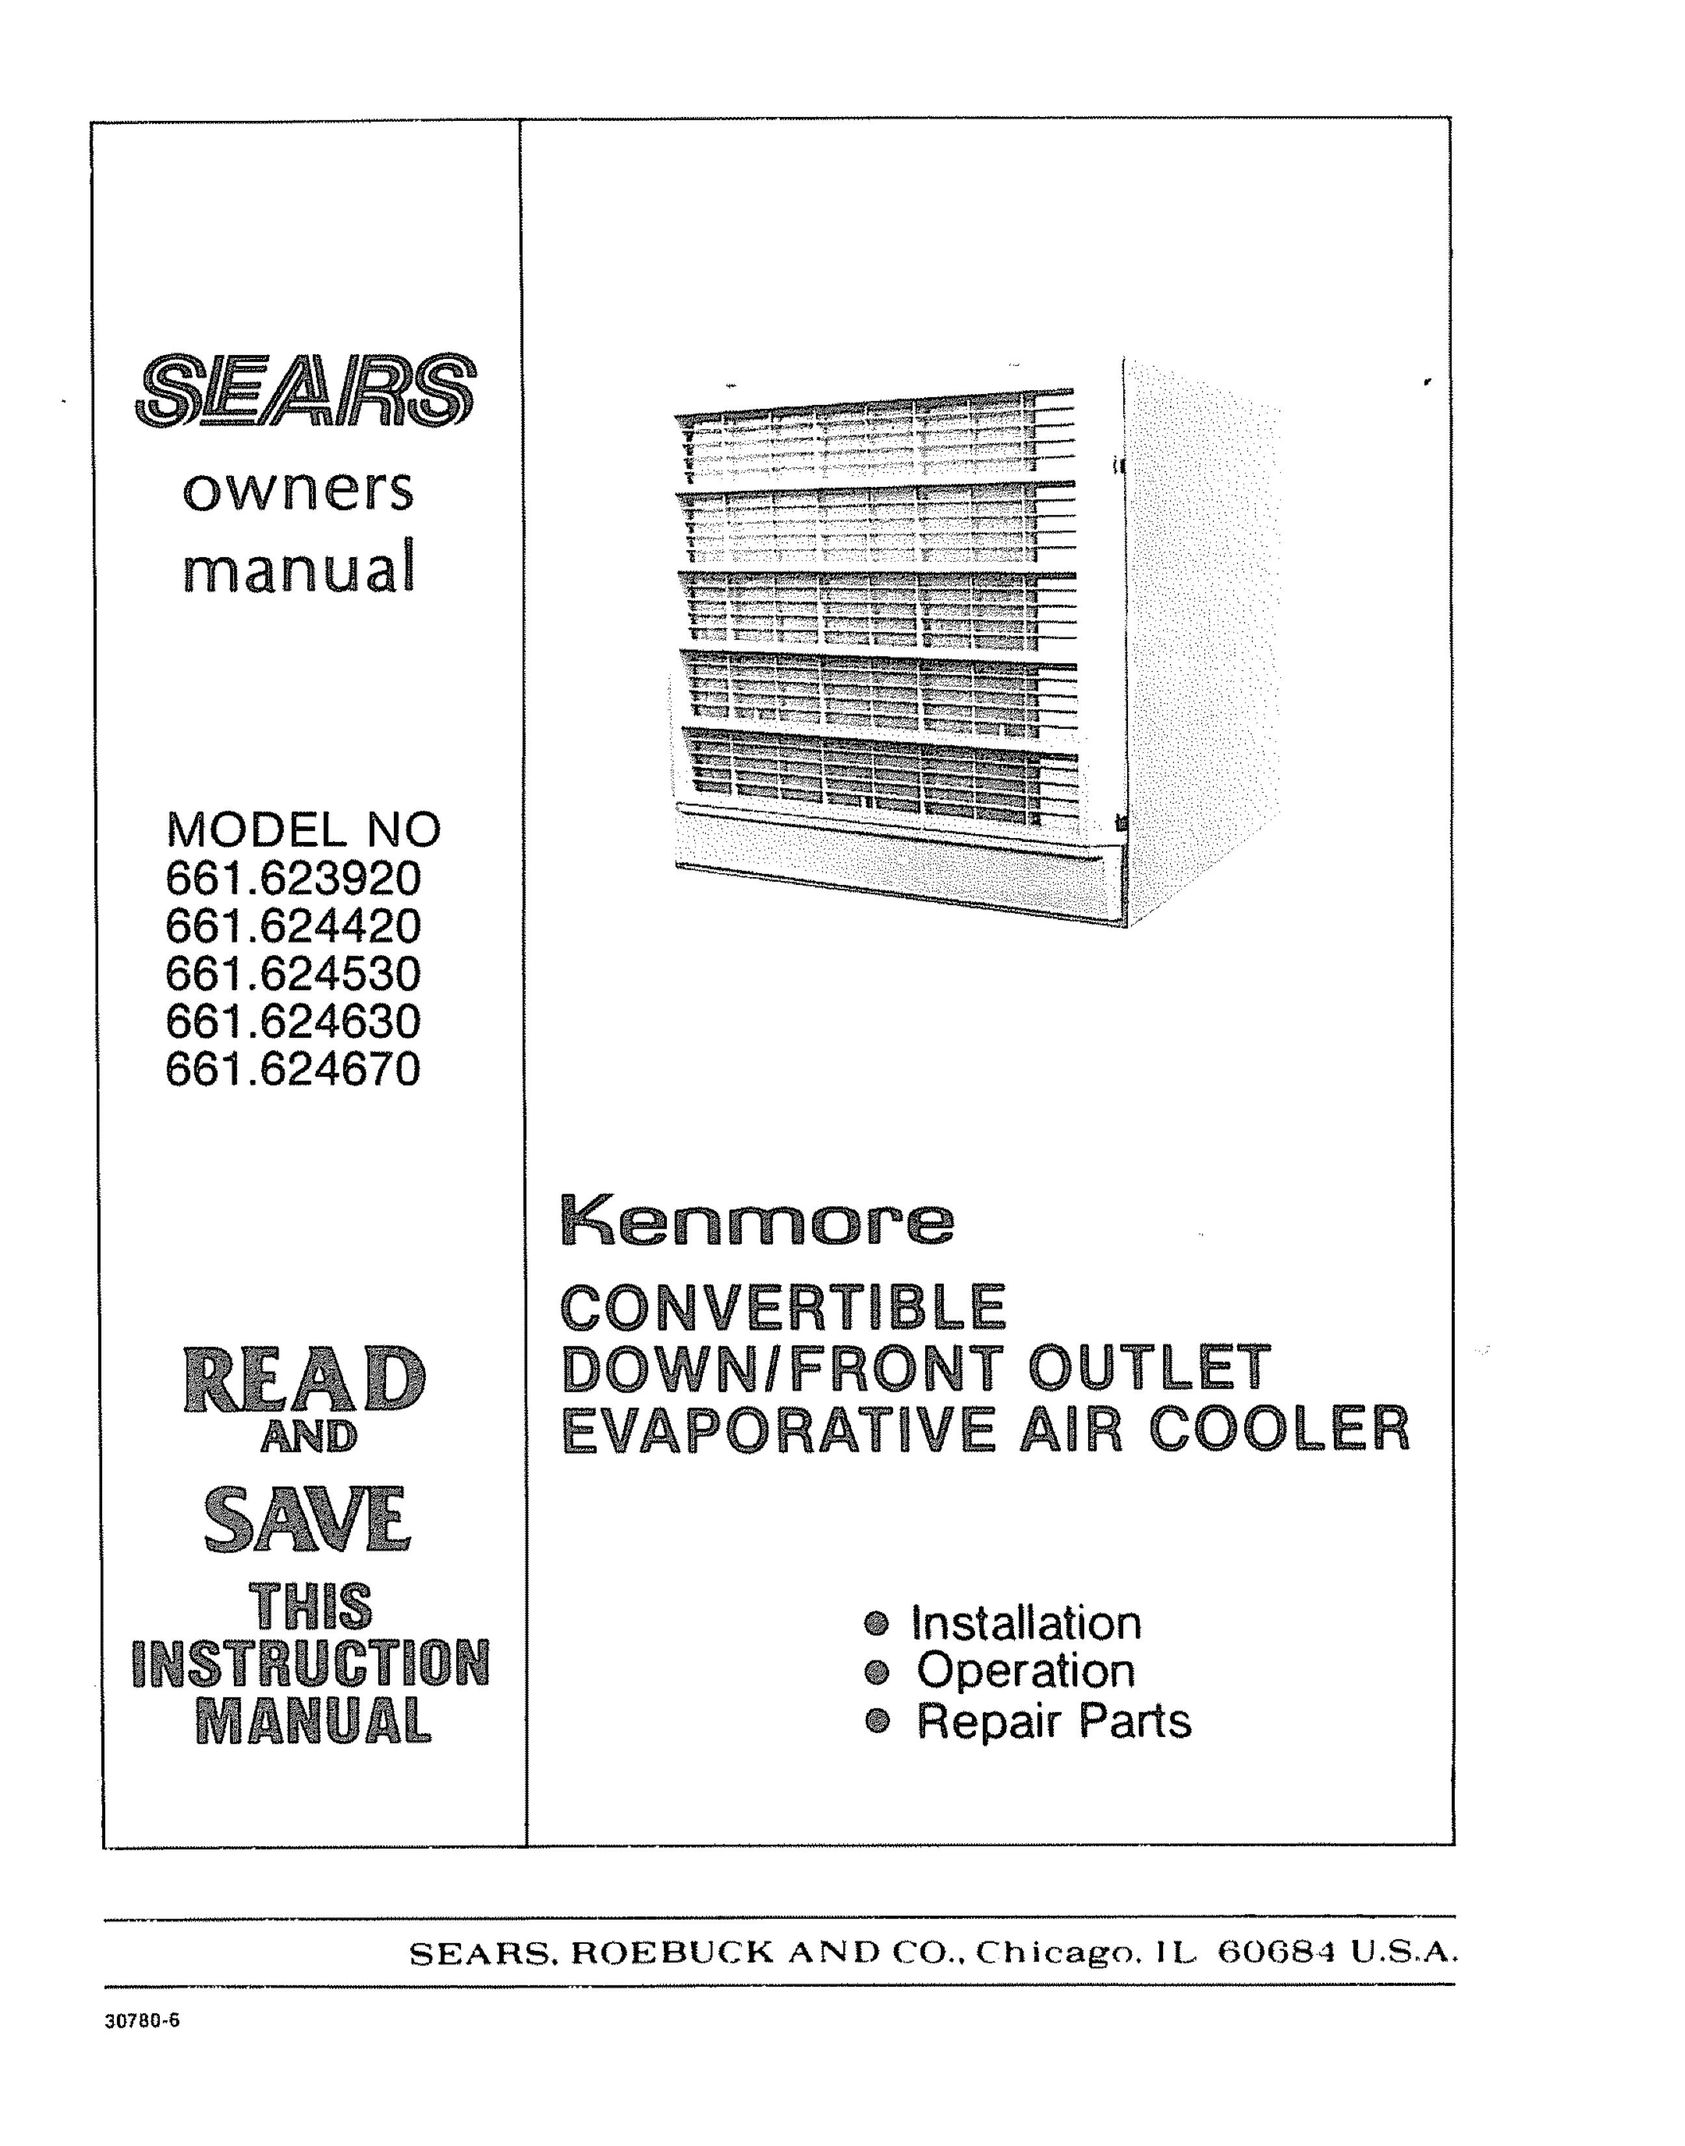 Sears 661.62463 Air Conditioner User Manual